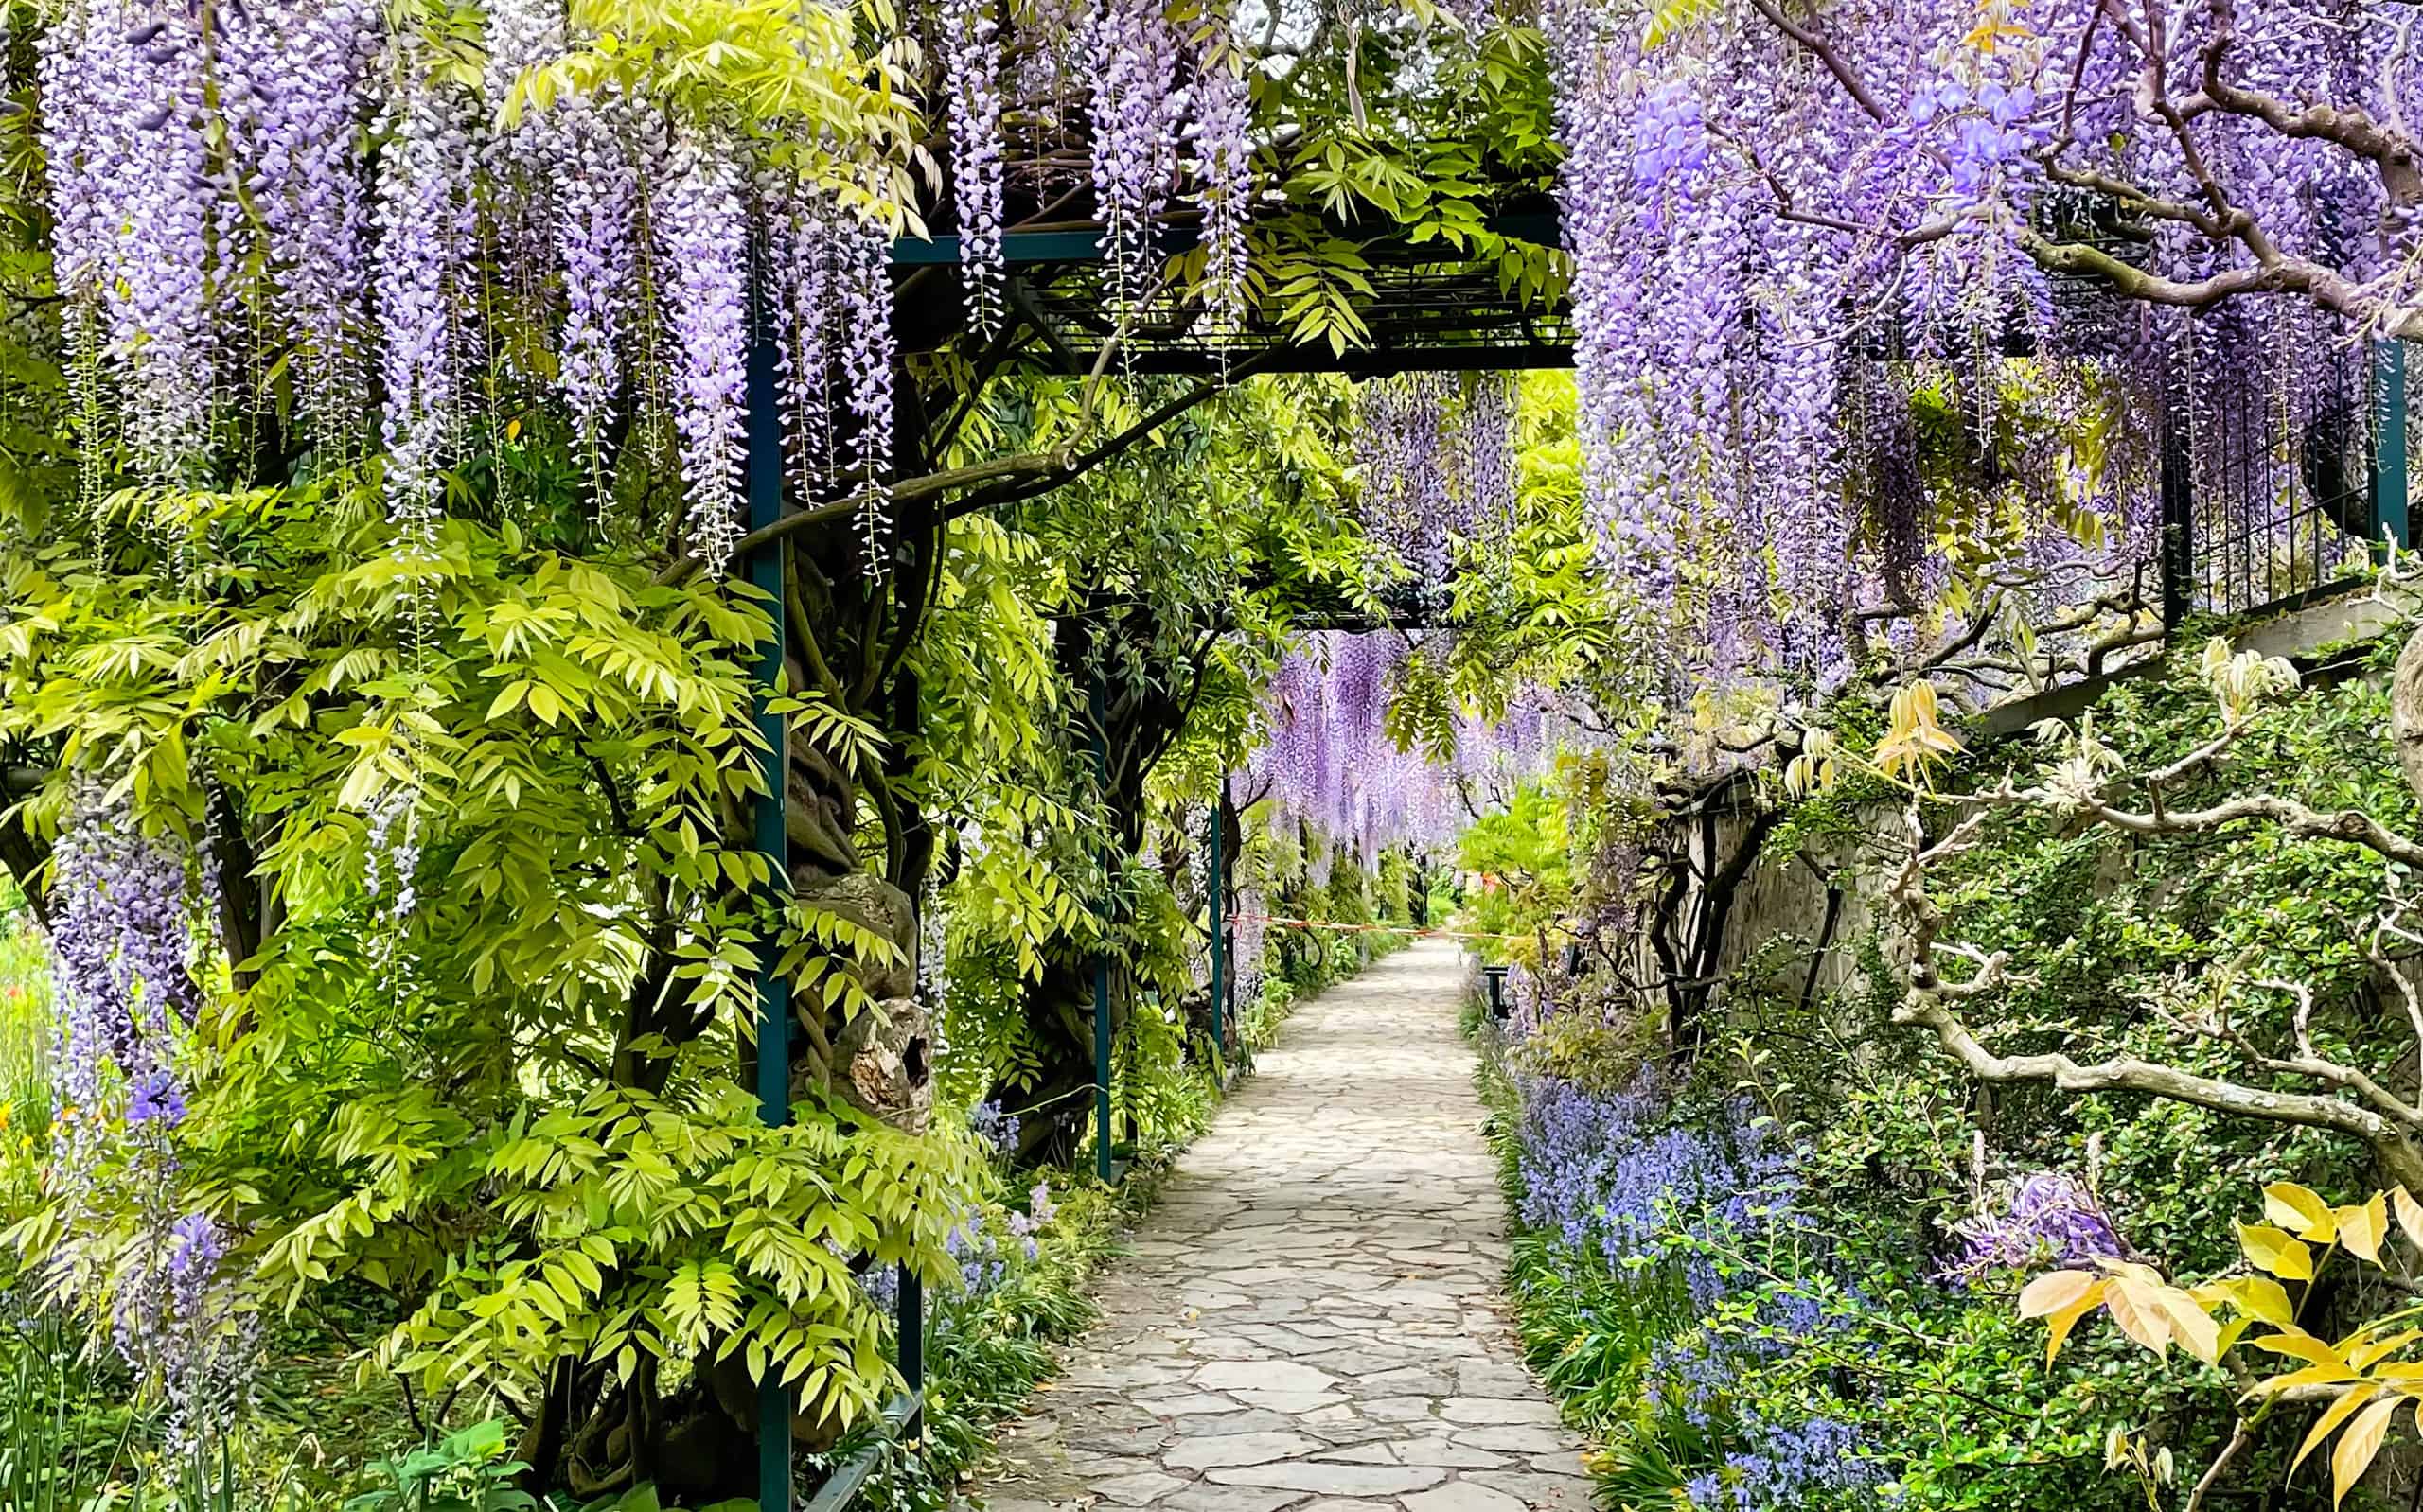 The great garden wisteria blossoms in bloom. Wisteria alley in blossom in a spring time. Germany, Weinheim, Hermannshof garden